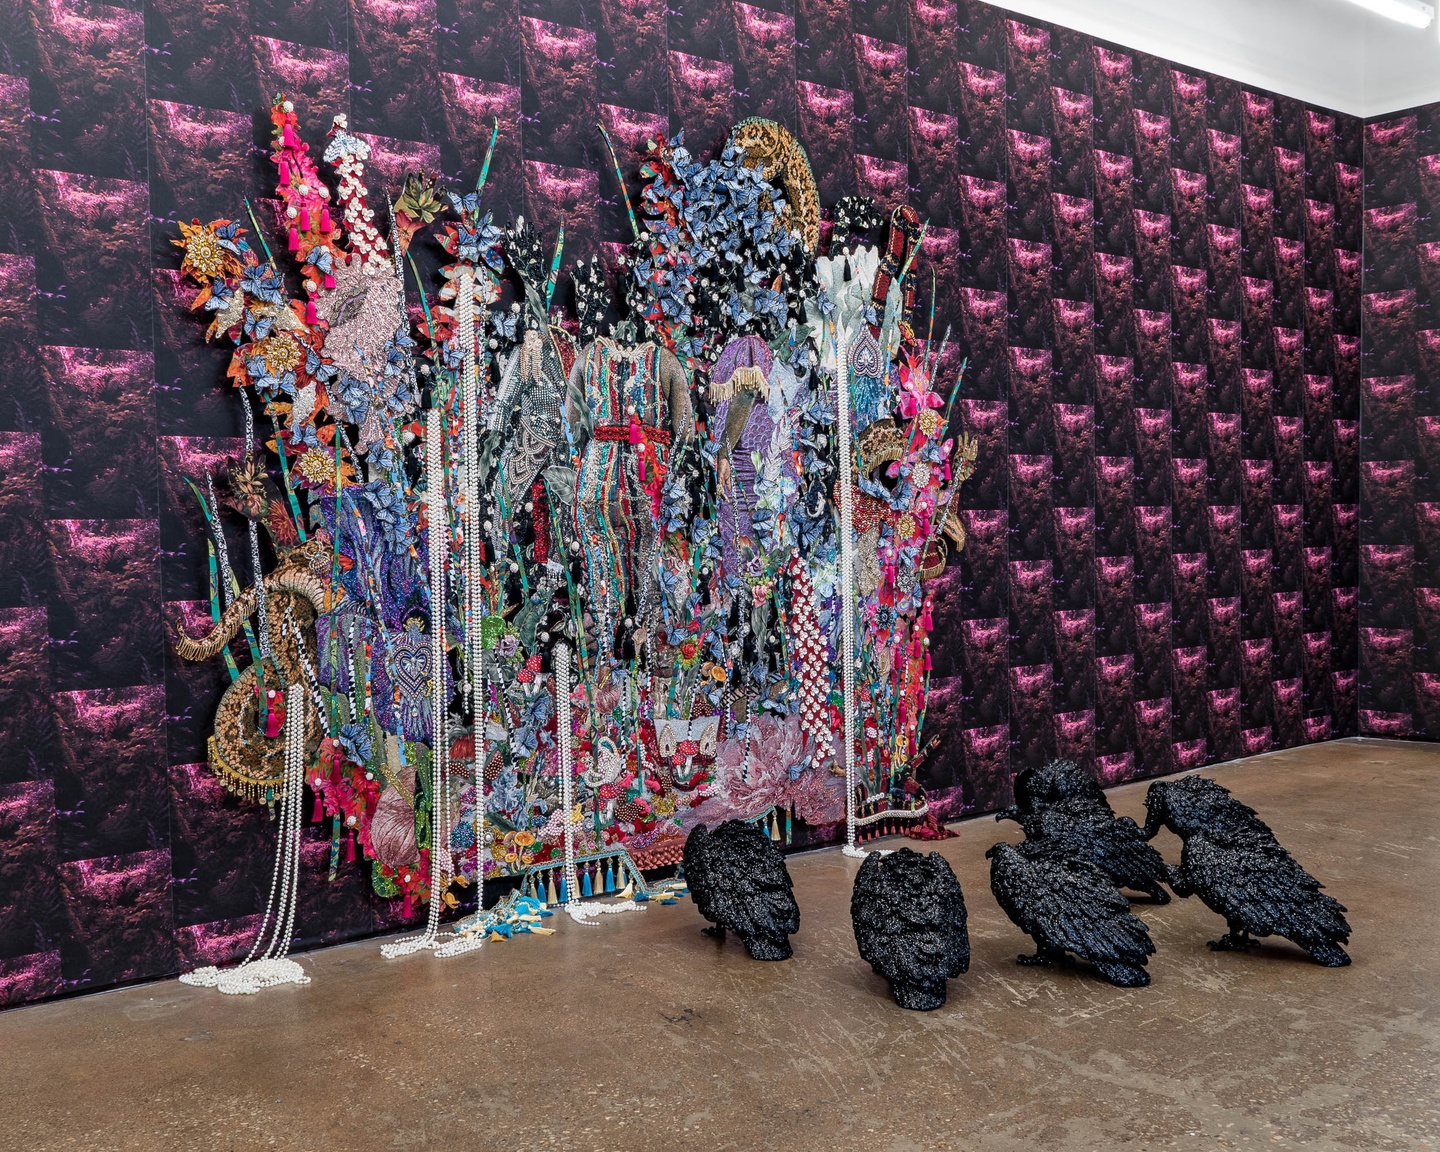 Multimedia installation, featuring a patterned wallpaper on two walls of a gallery with a vibrant, multimedia artwork featuring flowers and beads, with several black bird sculptures on the floor.